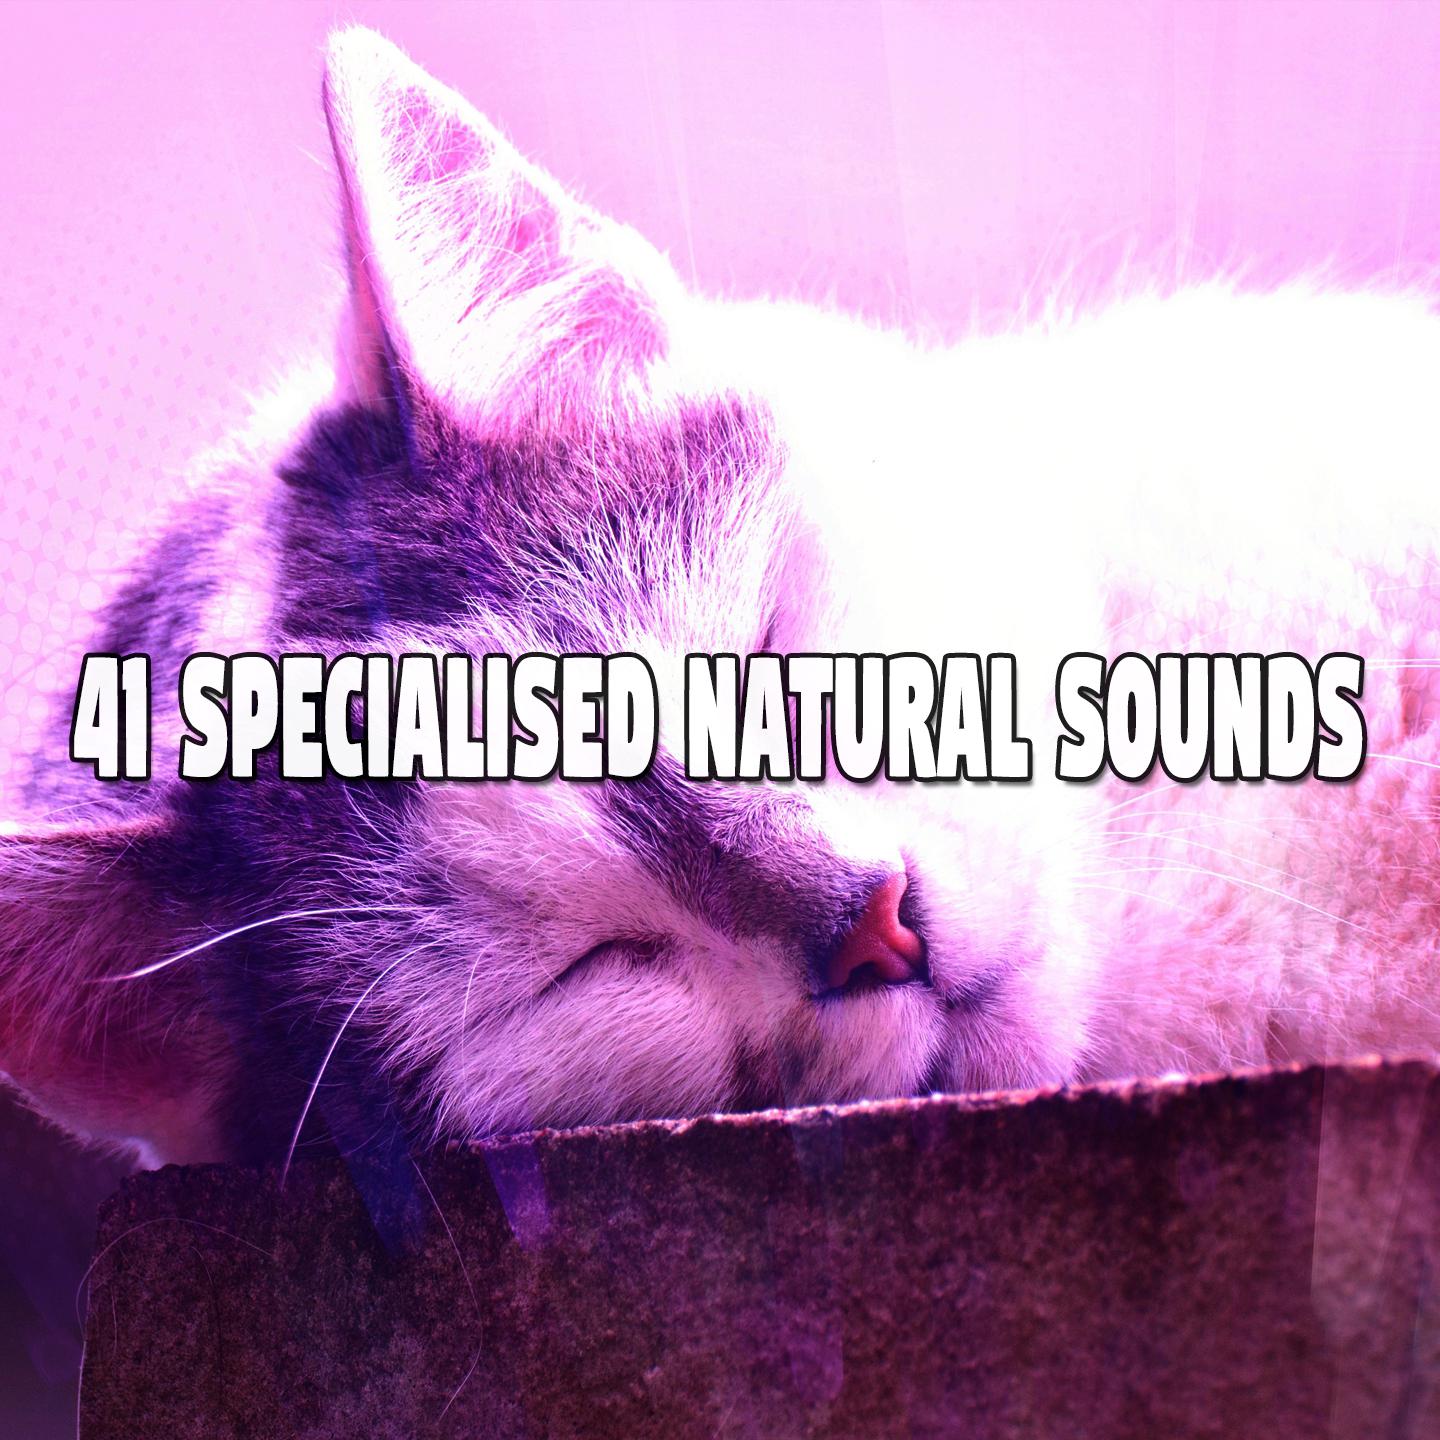 41 Specialised Natural Sounds